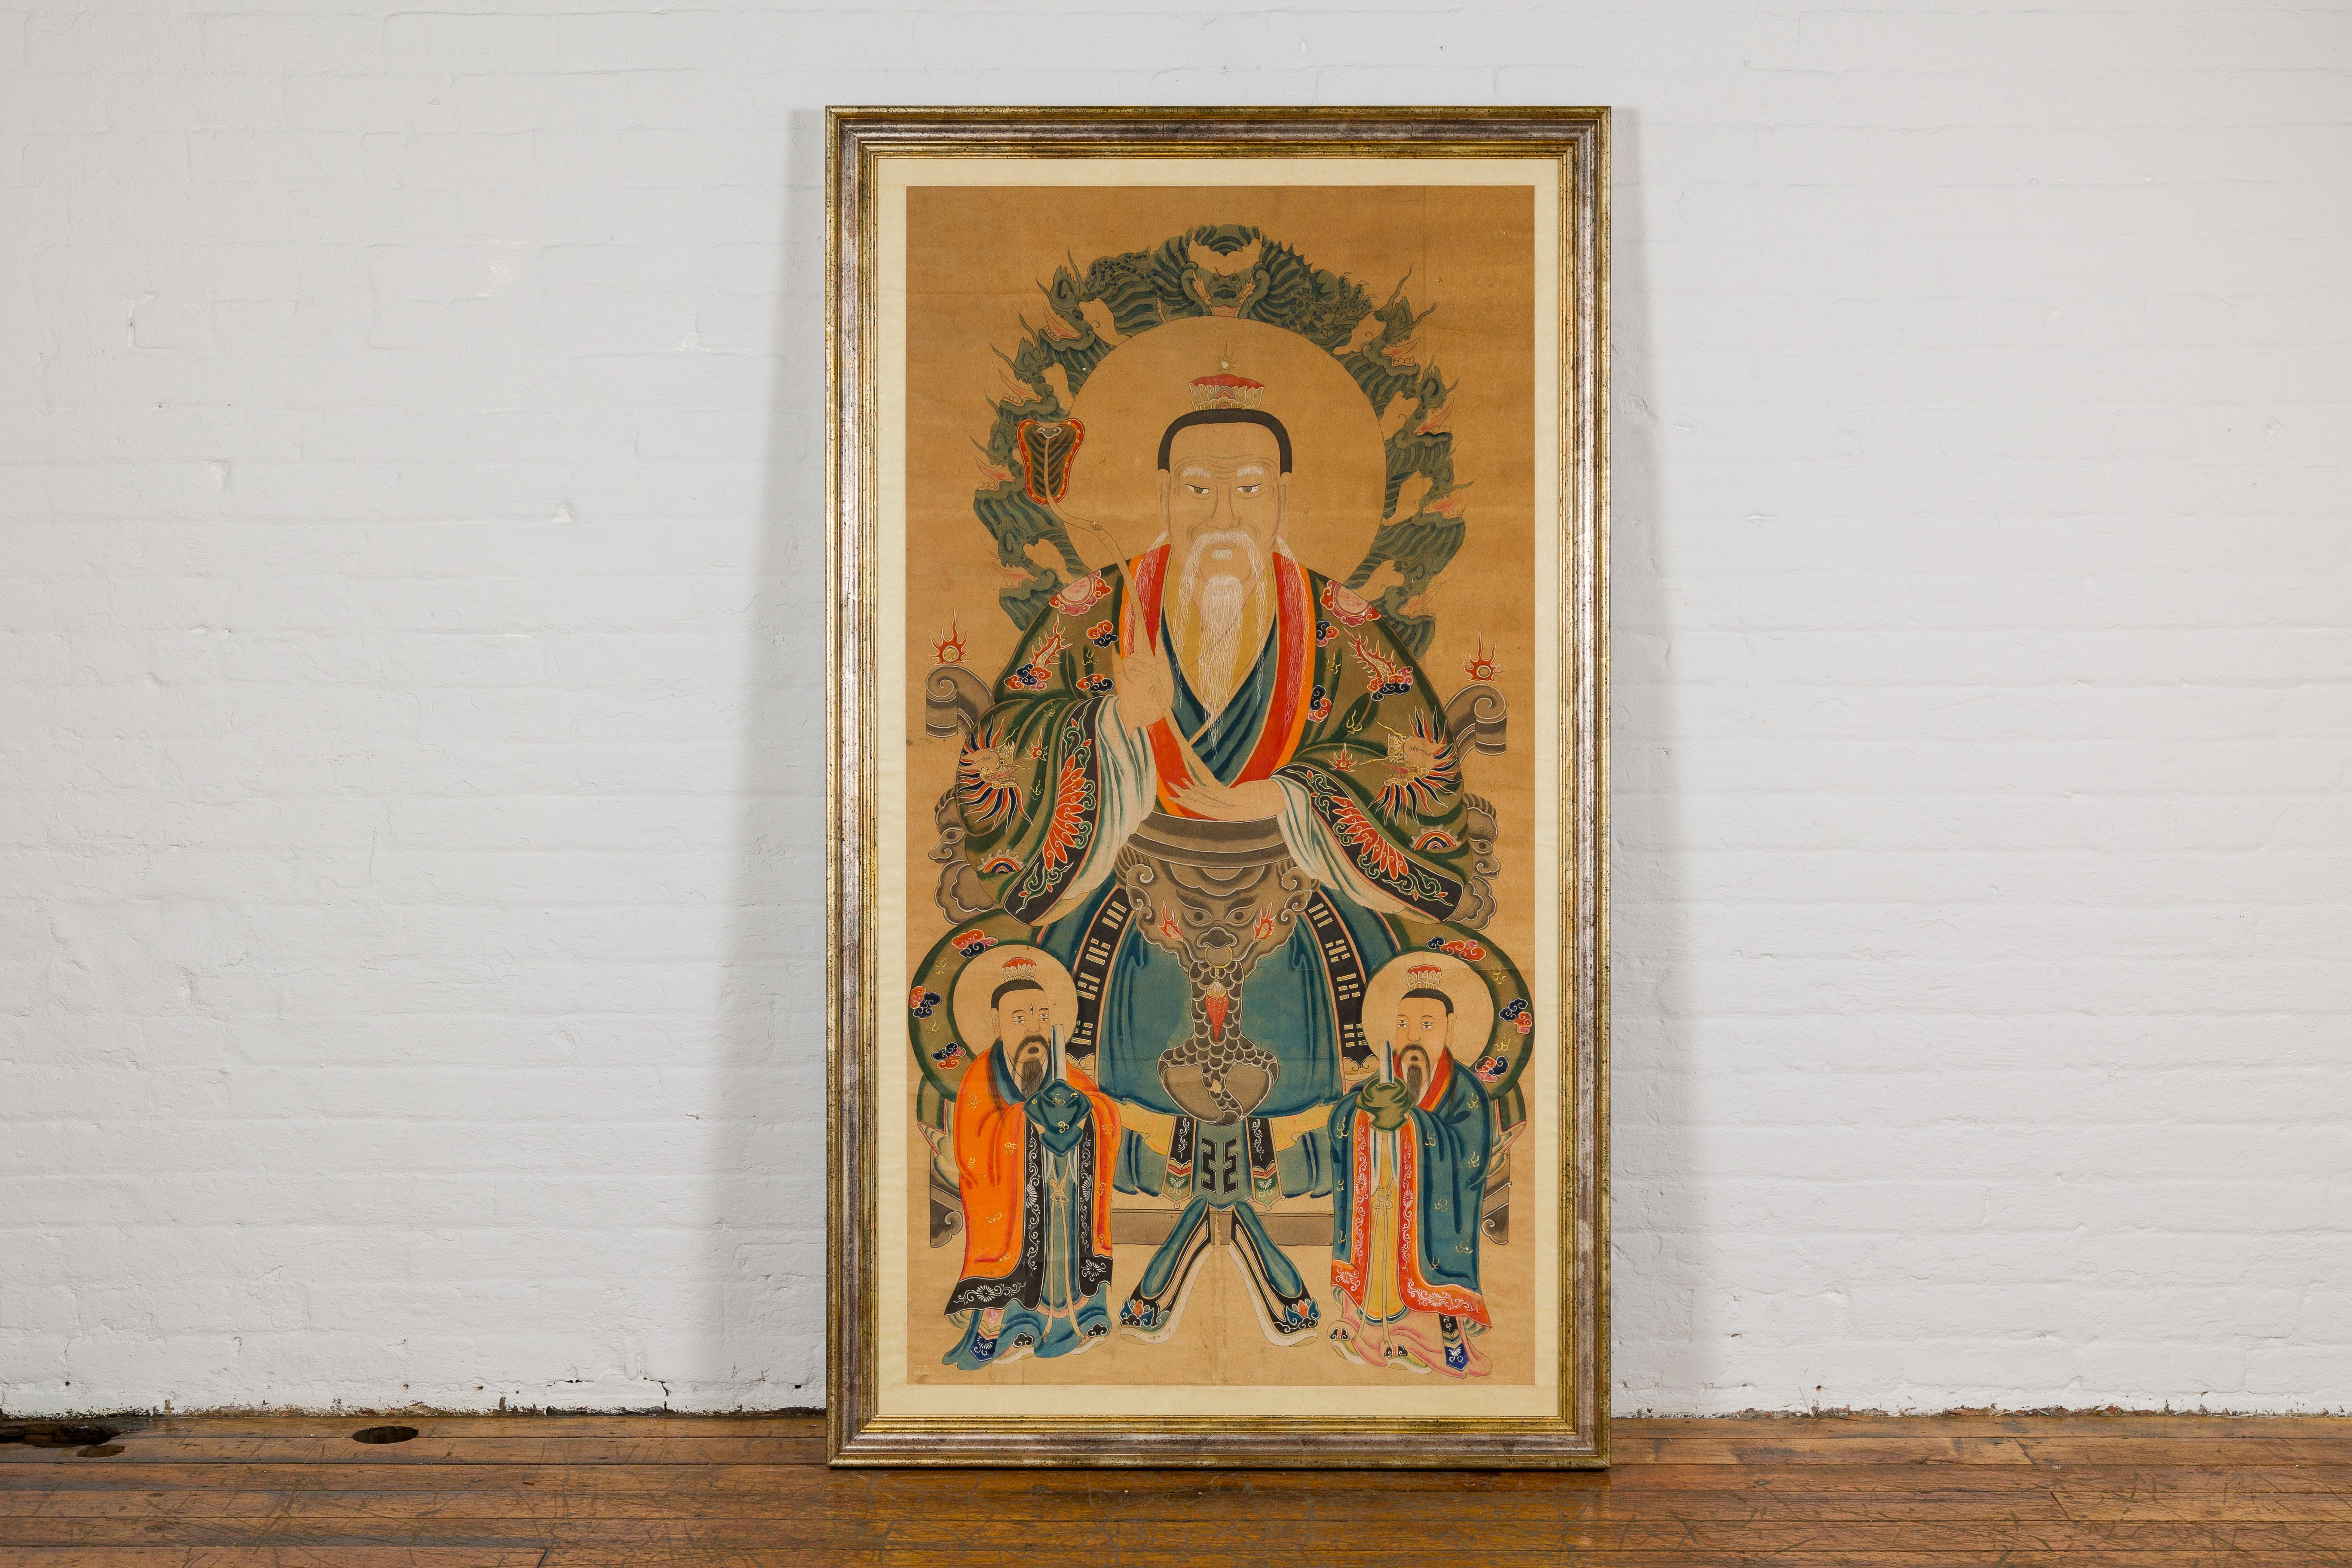 A large antique hand-painted Taoist portrait on parchment paper with silk matting, in custom frame. This large antique hand-painted Taoist portrait is a mesmerizing work of art that encapsulates centuries of tradition and symbolism. Painted on